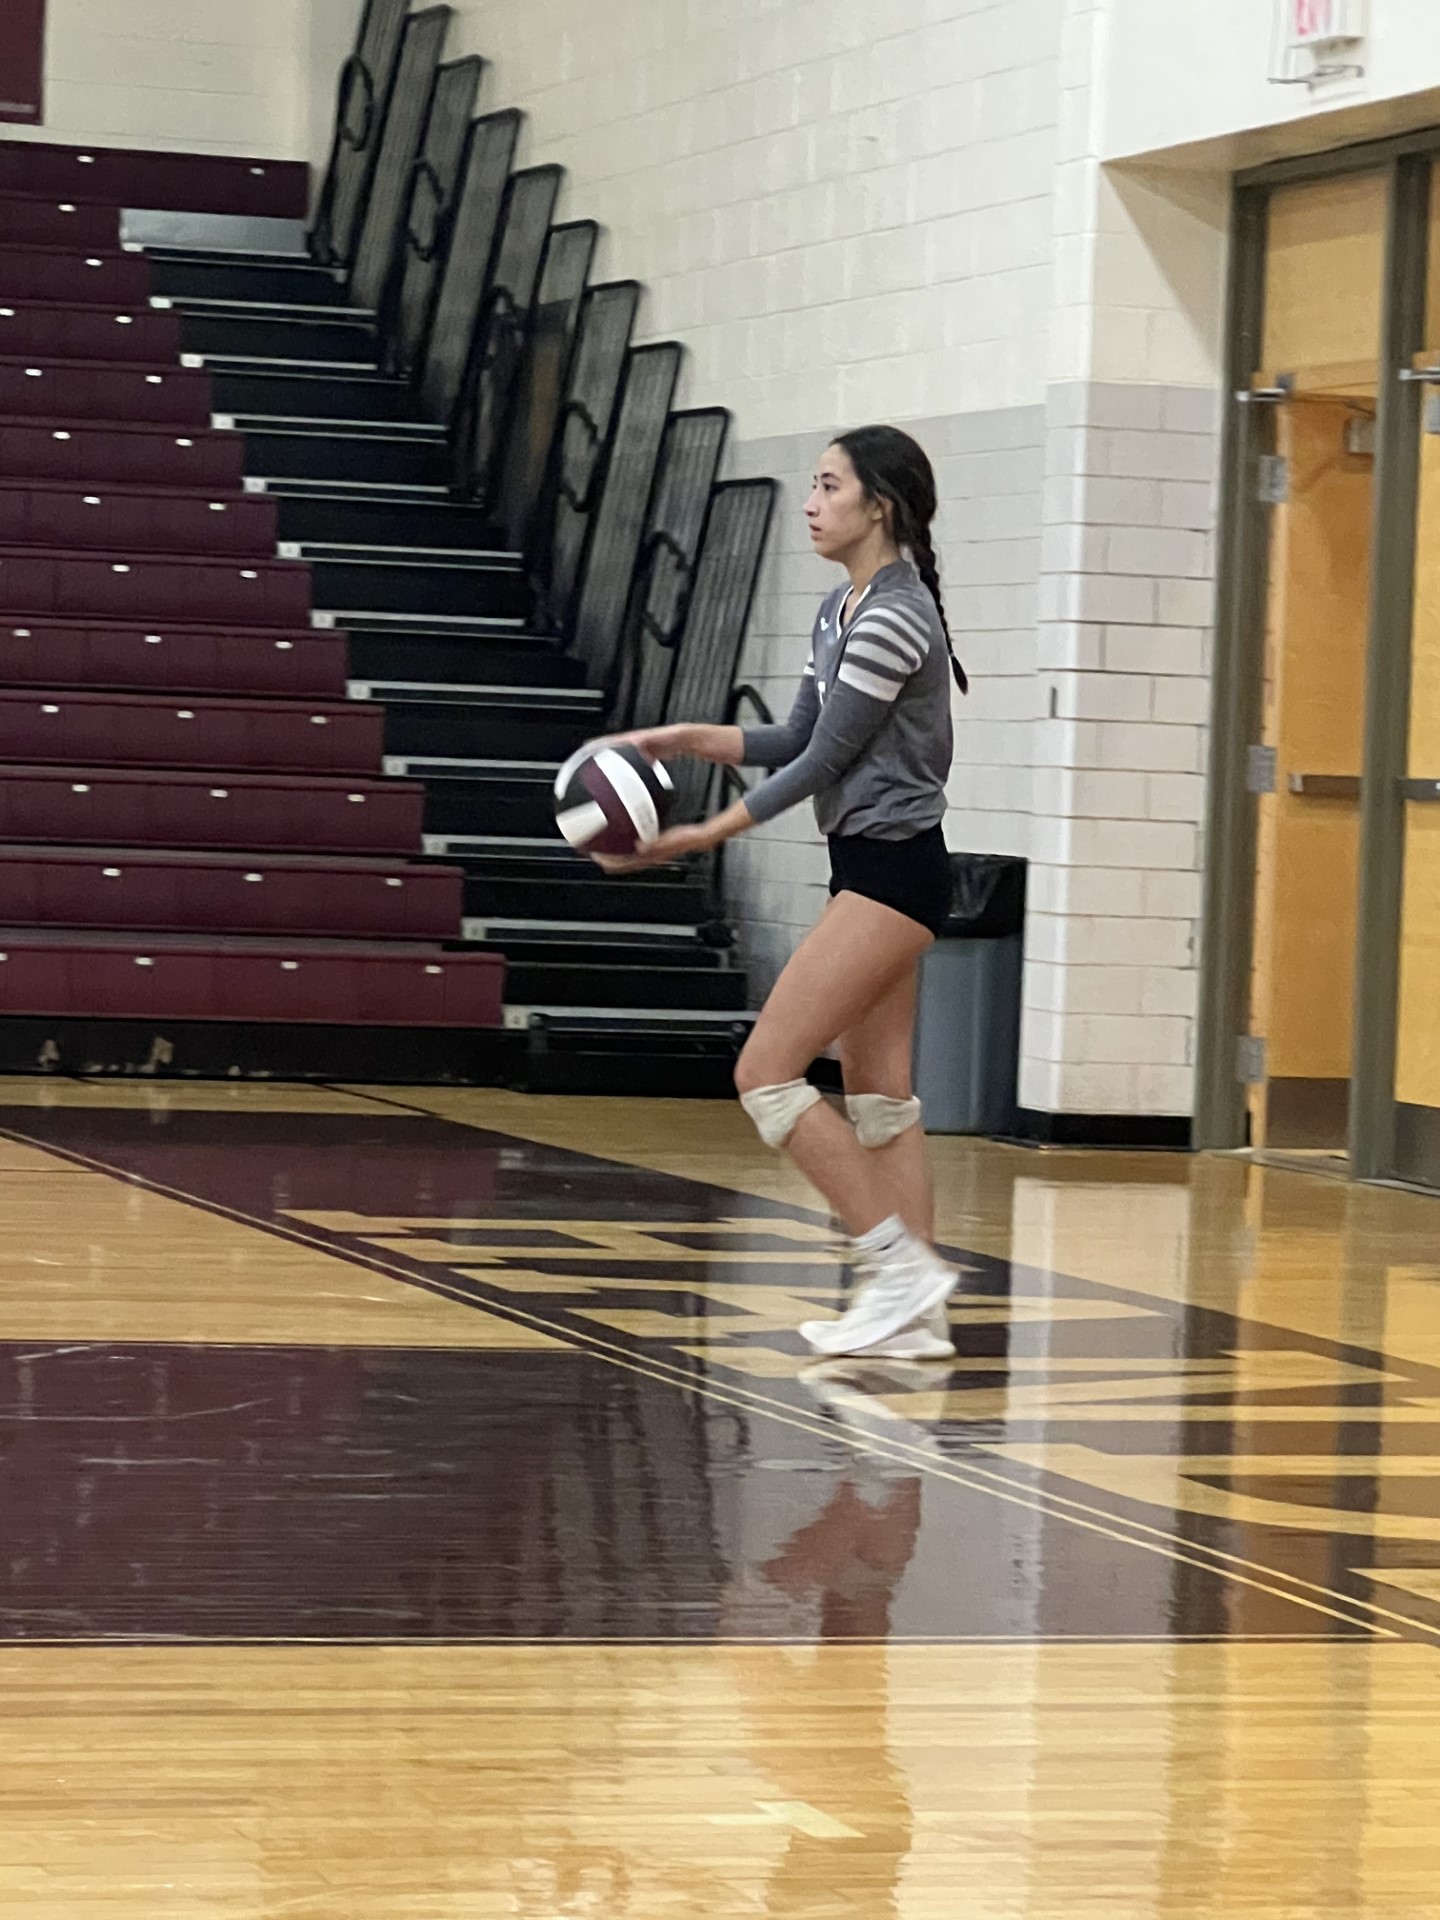 Volleyball player, Marcela Lawhorn getting ready to pitch the ball.